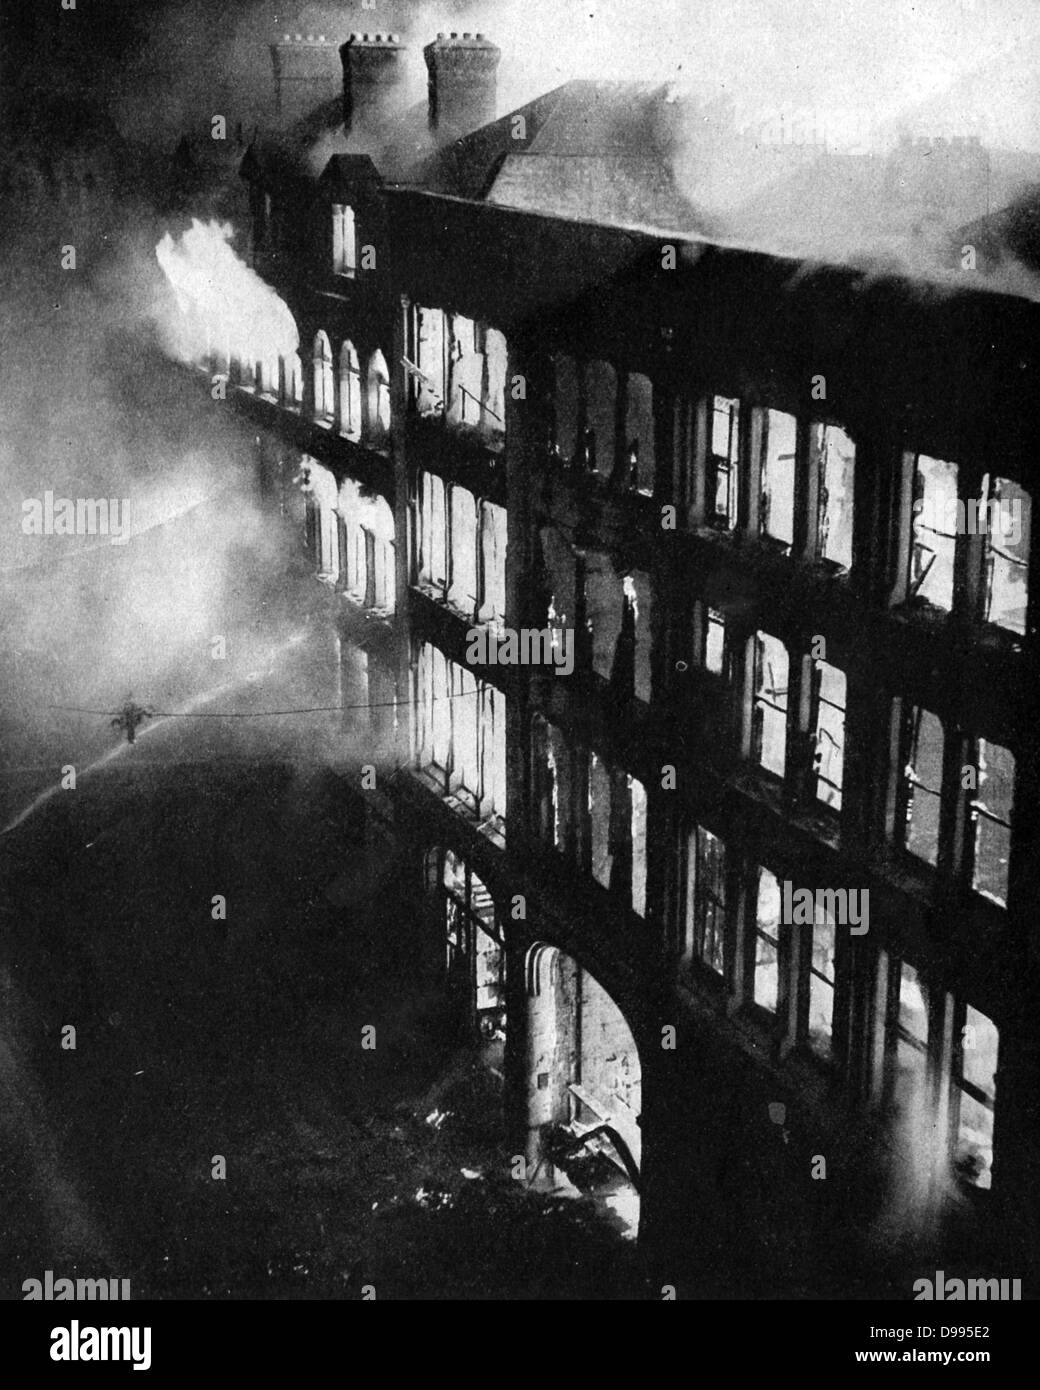 Warehouses in the east of London burning, set alight by bombs dropped from Lufwaffe (German Air Force) planes during the Blitz on the night of 24-25 August 1940. London firefighters trying to extinguish flames with hoses. damage. Stock Photo